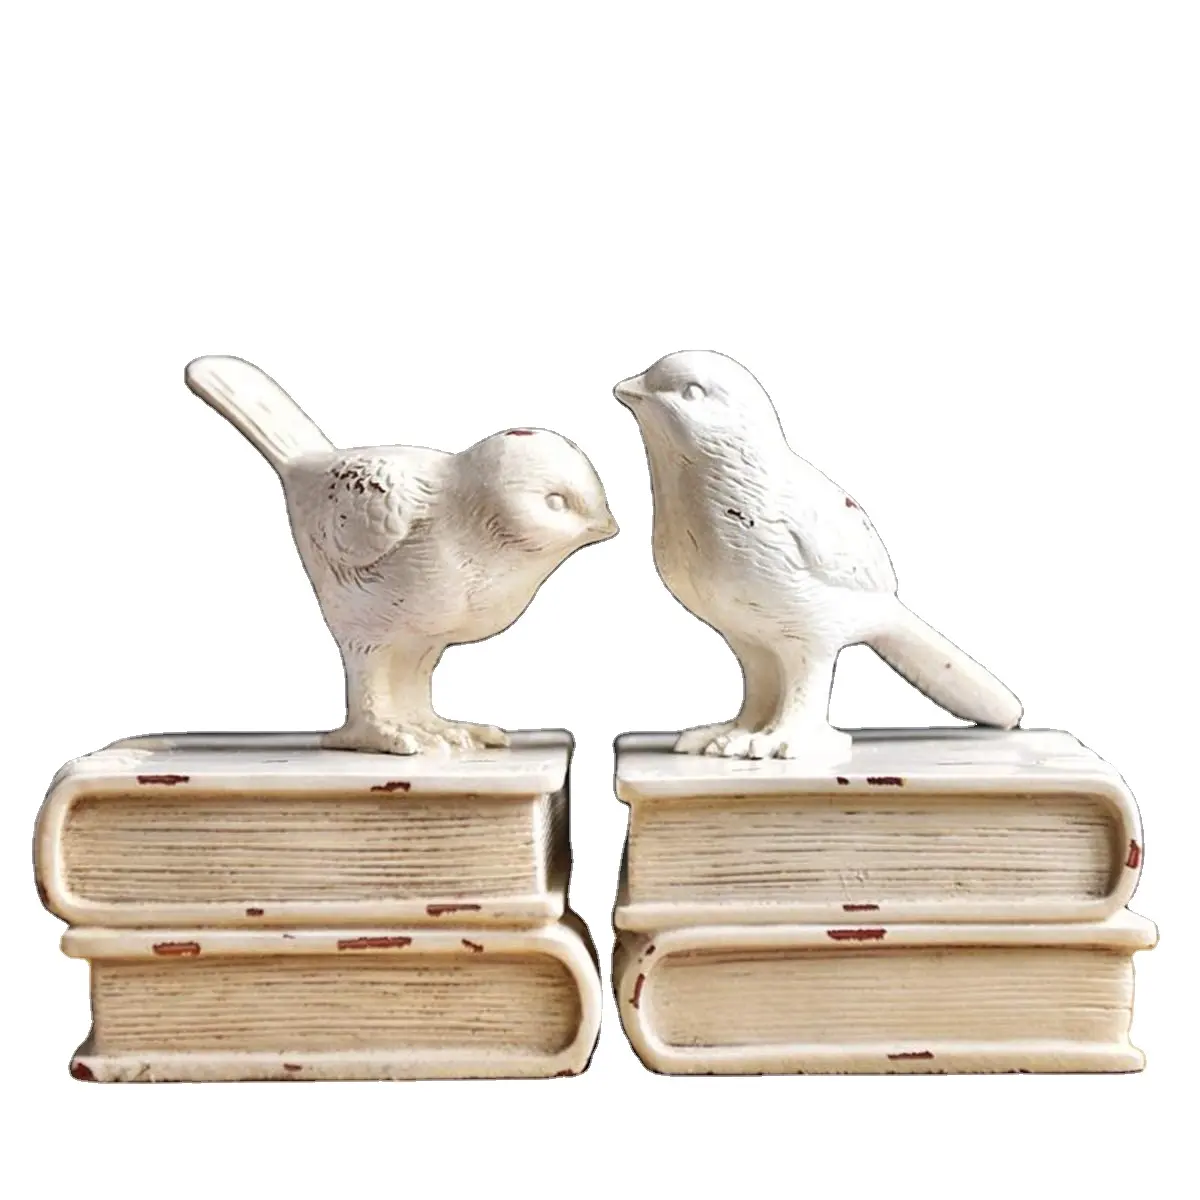 Home Decorative White Birds & Books Vintage Design Resin Bookshelf Bookends Paper Weights Book Ends Bookend